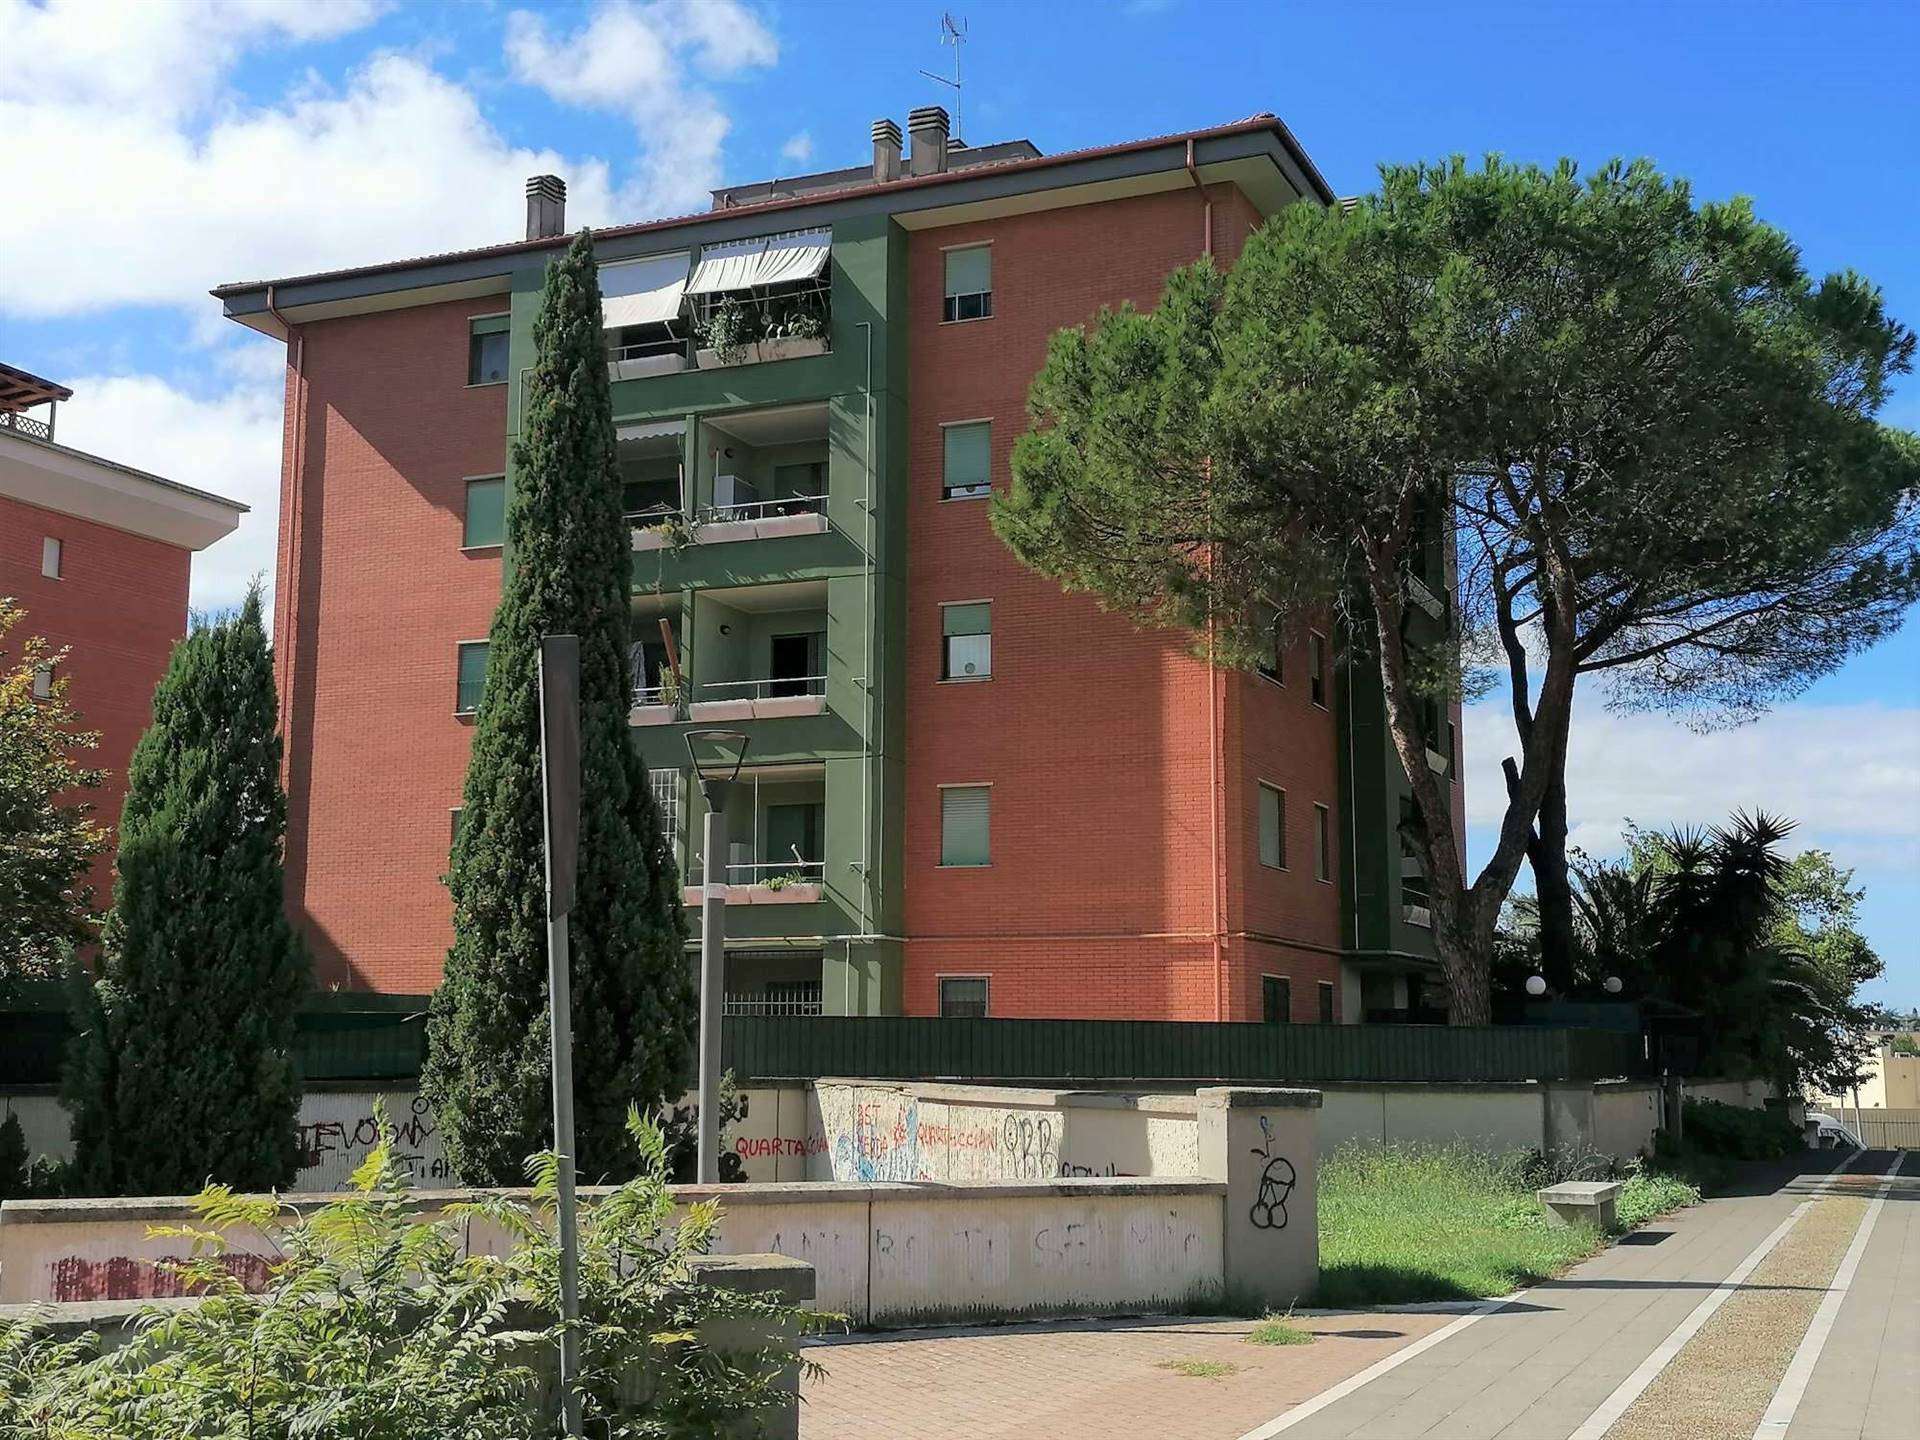 TORRESINA, ROMA, Apartment for sale of 60 Sq. mt., Good condition, Heating Individual heating system, Energetic class: G, Epi: 175 kwh/m2 year, placed at 1° on 4, composed by: 2 Rooms, Separate 